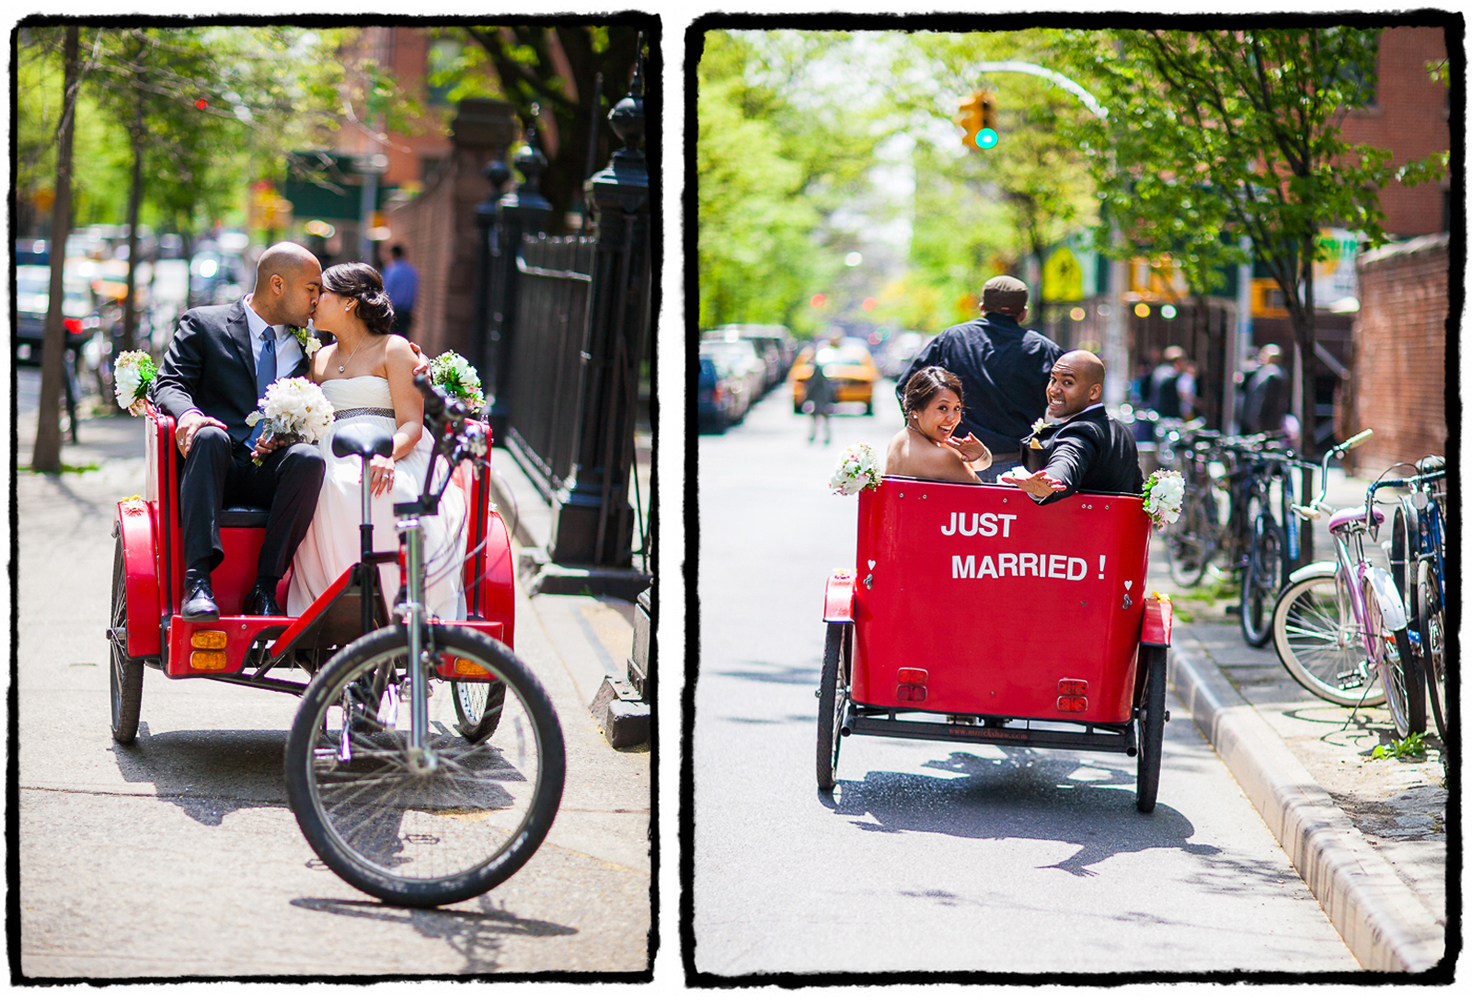 Josh and Karen lined up a sweet ride from their church ceremony to the reception in the East Village.